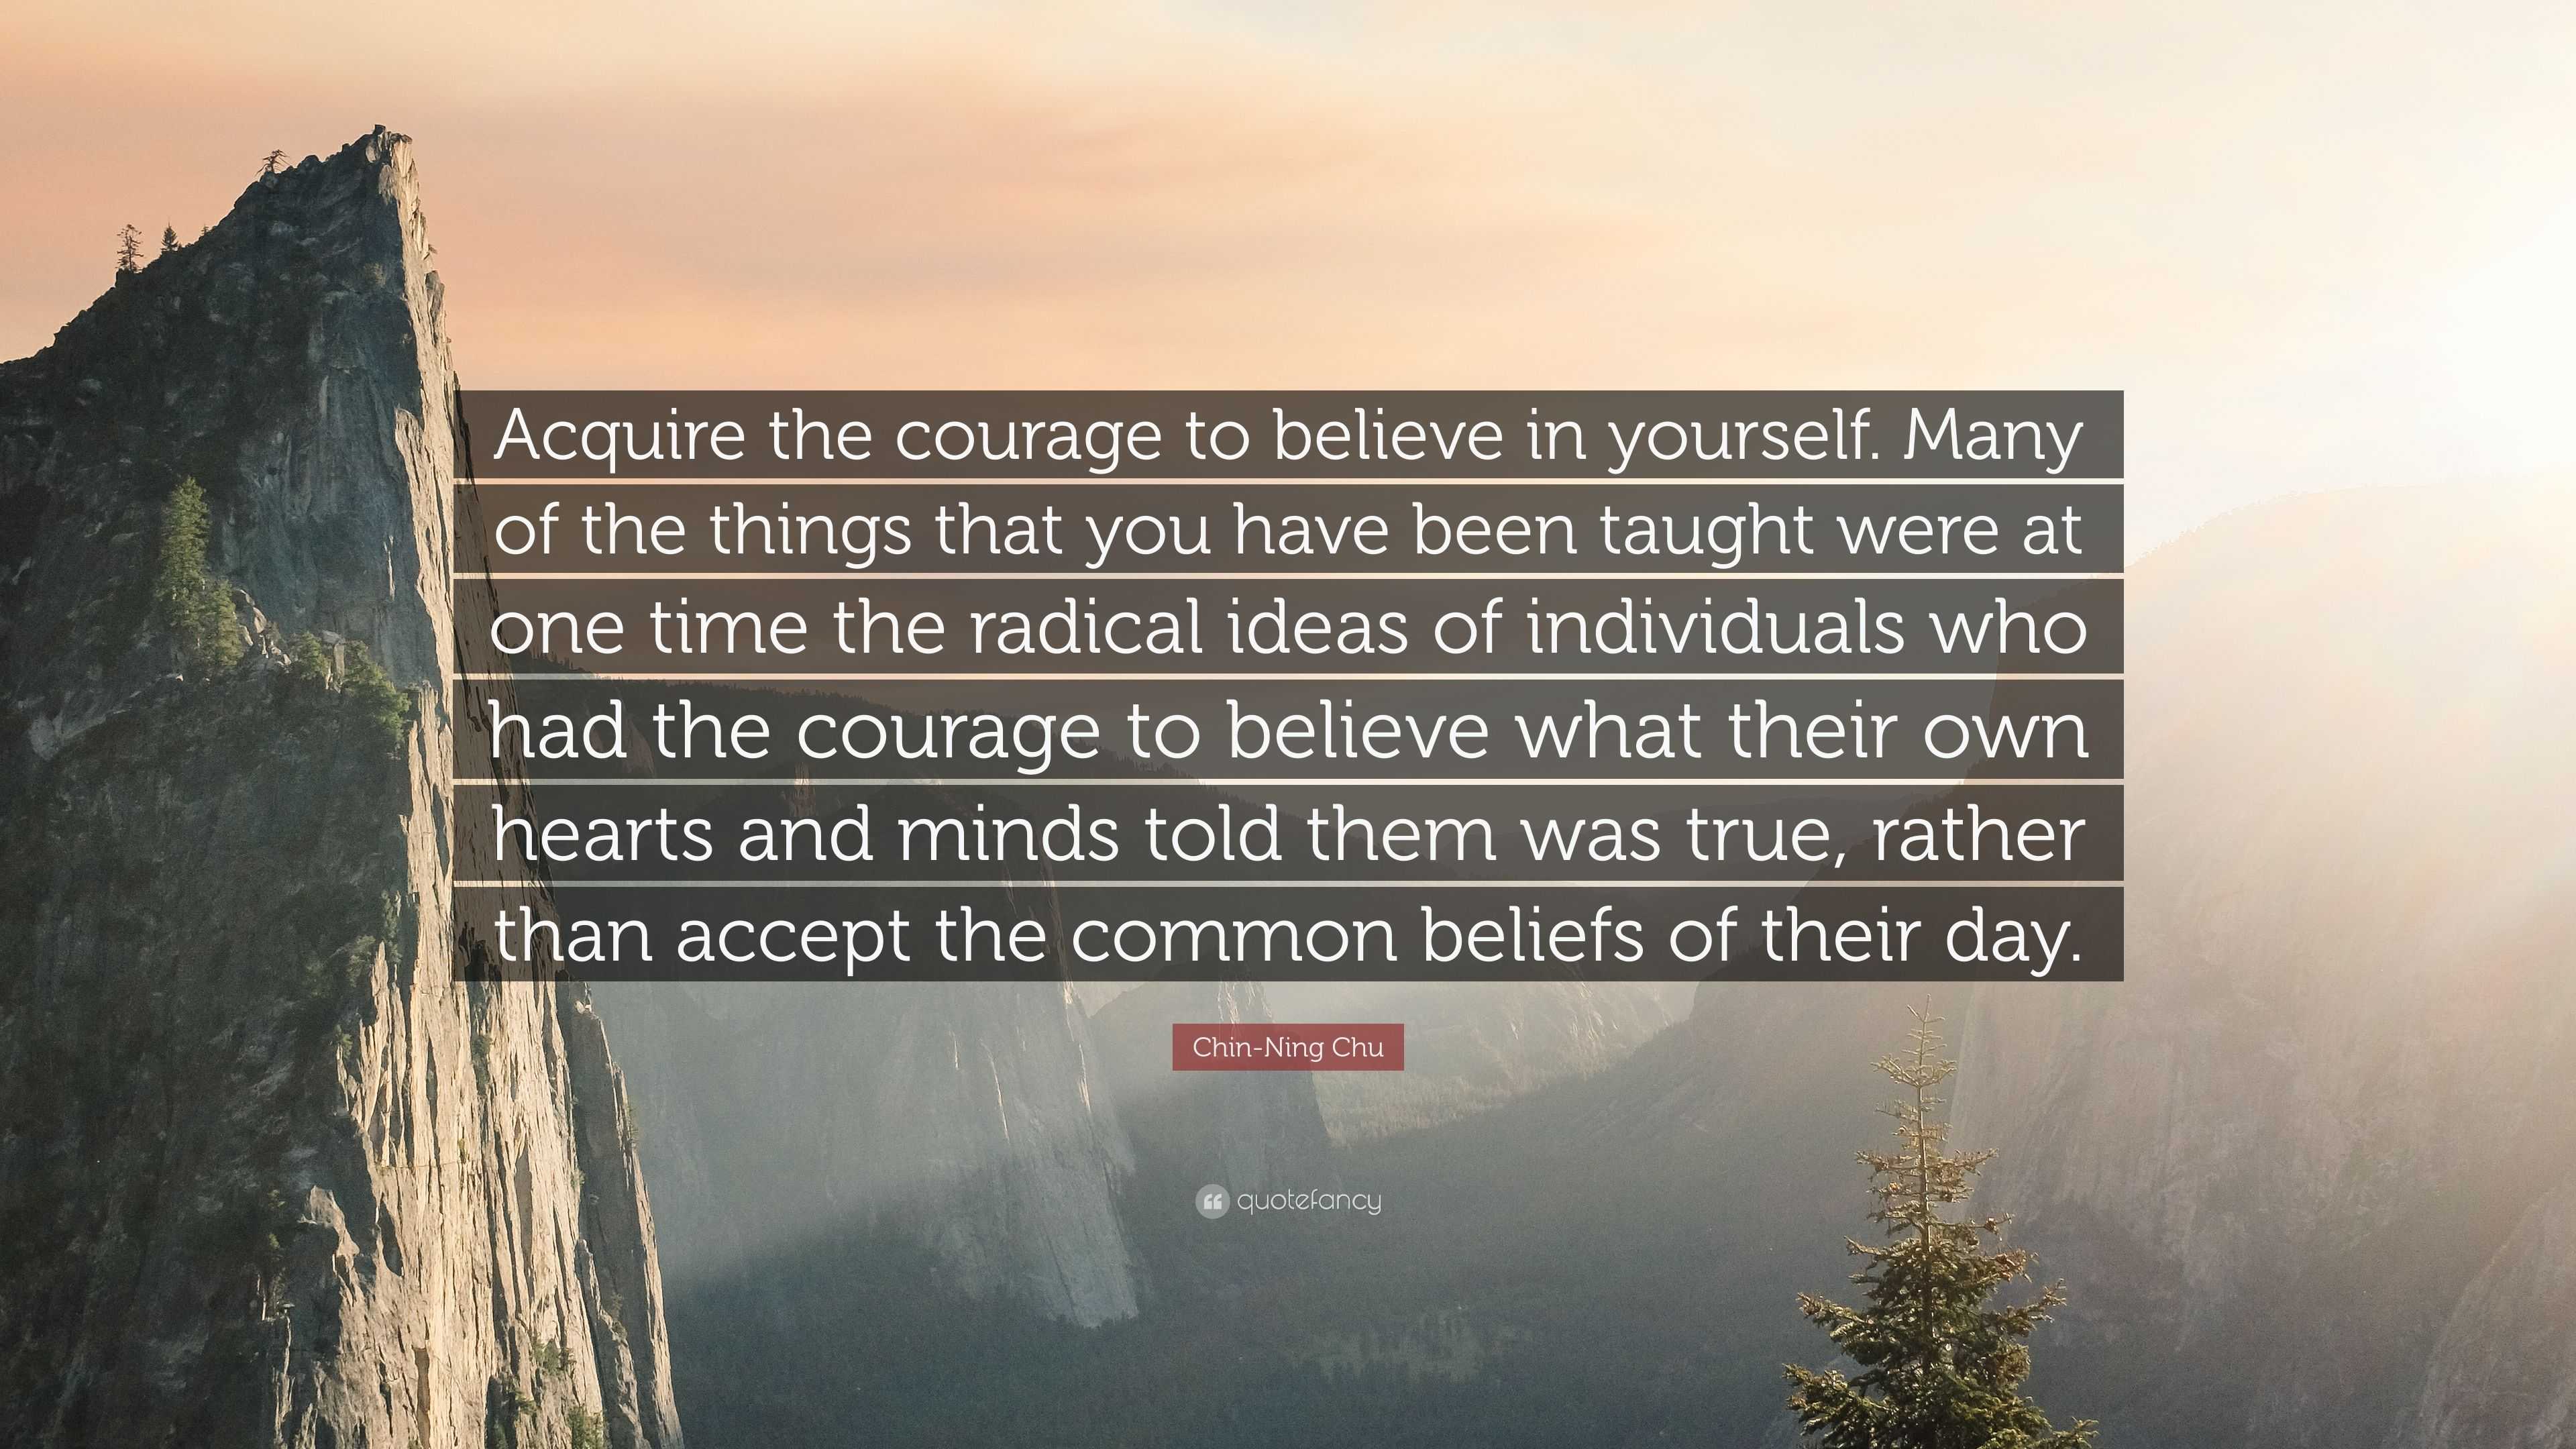 Chin-Ning Chu Quote: “Acquire the courage to believe in yourself. Many ...